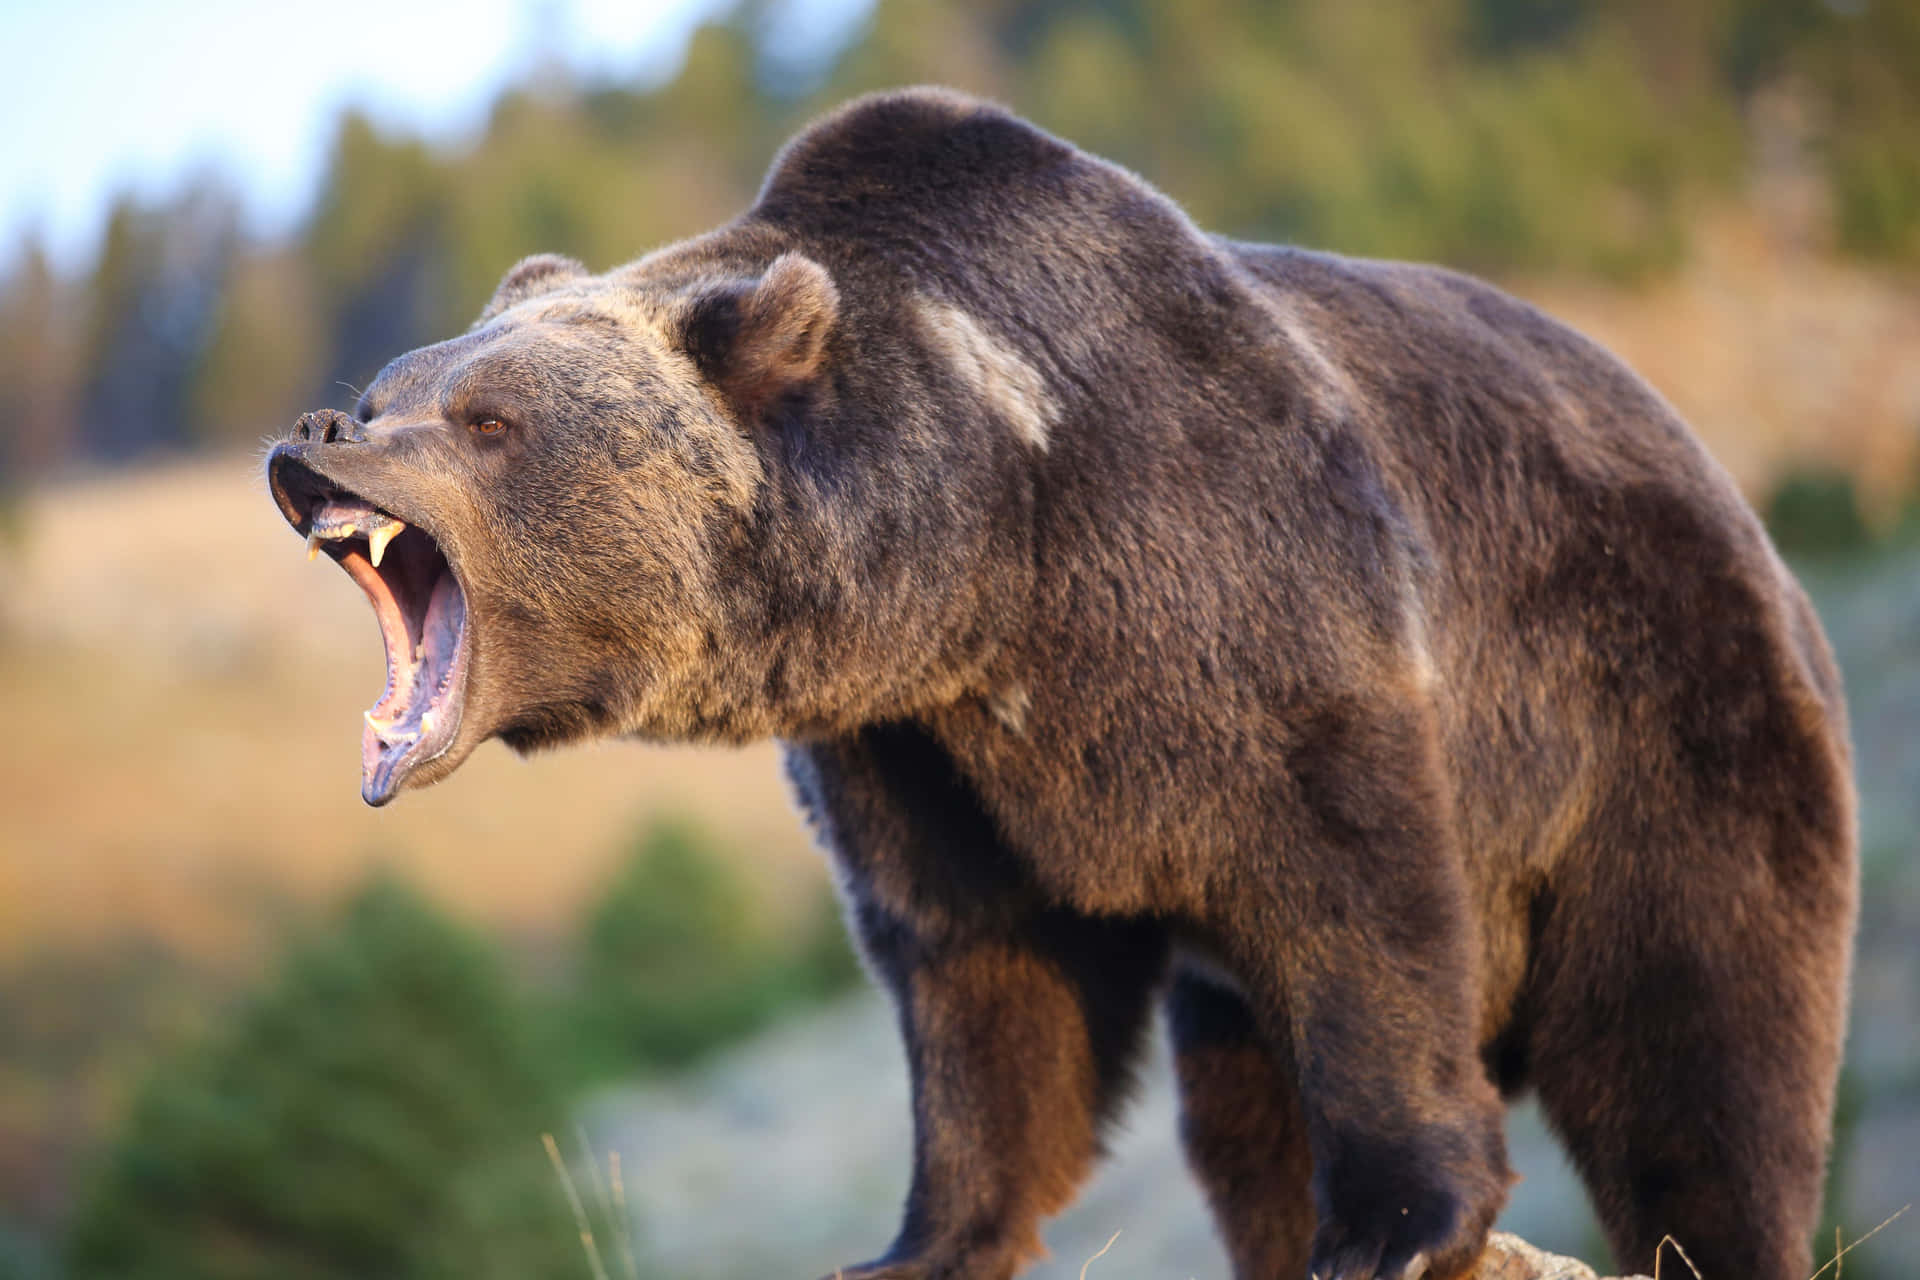 "The Fierce Strength of Nature - A Bear Attack"